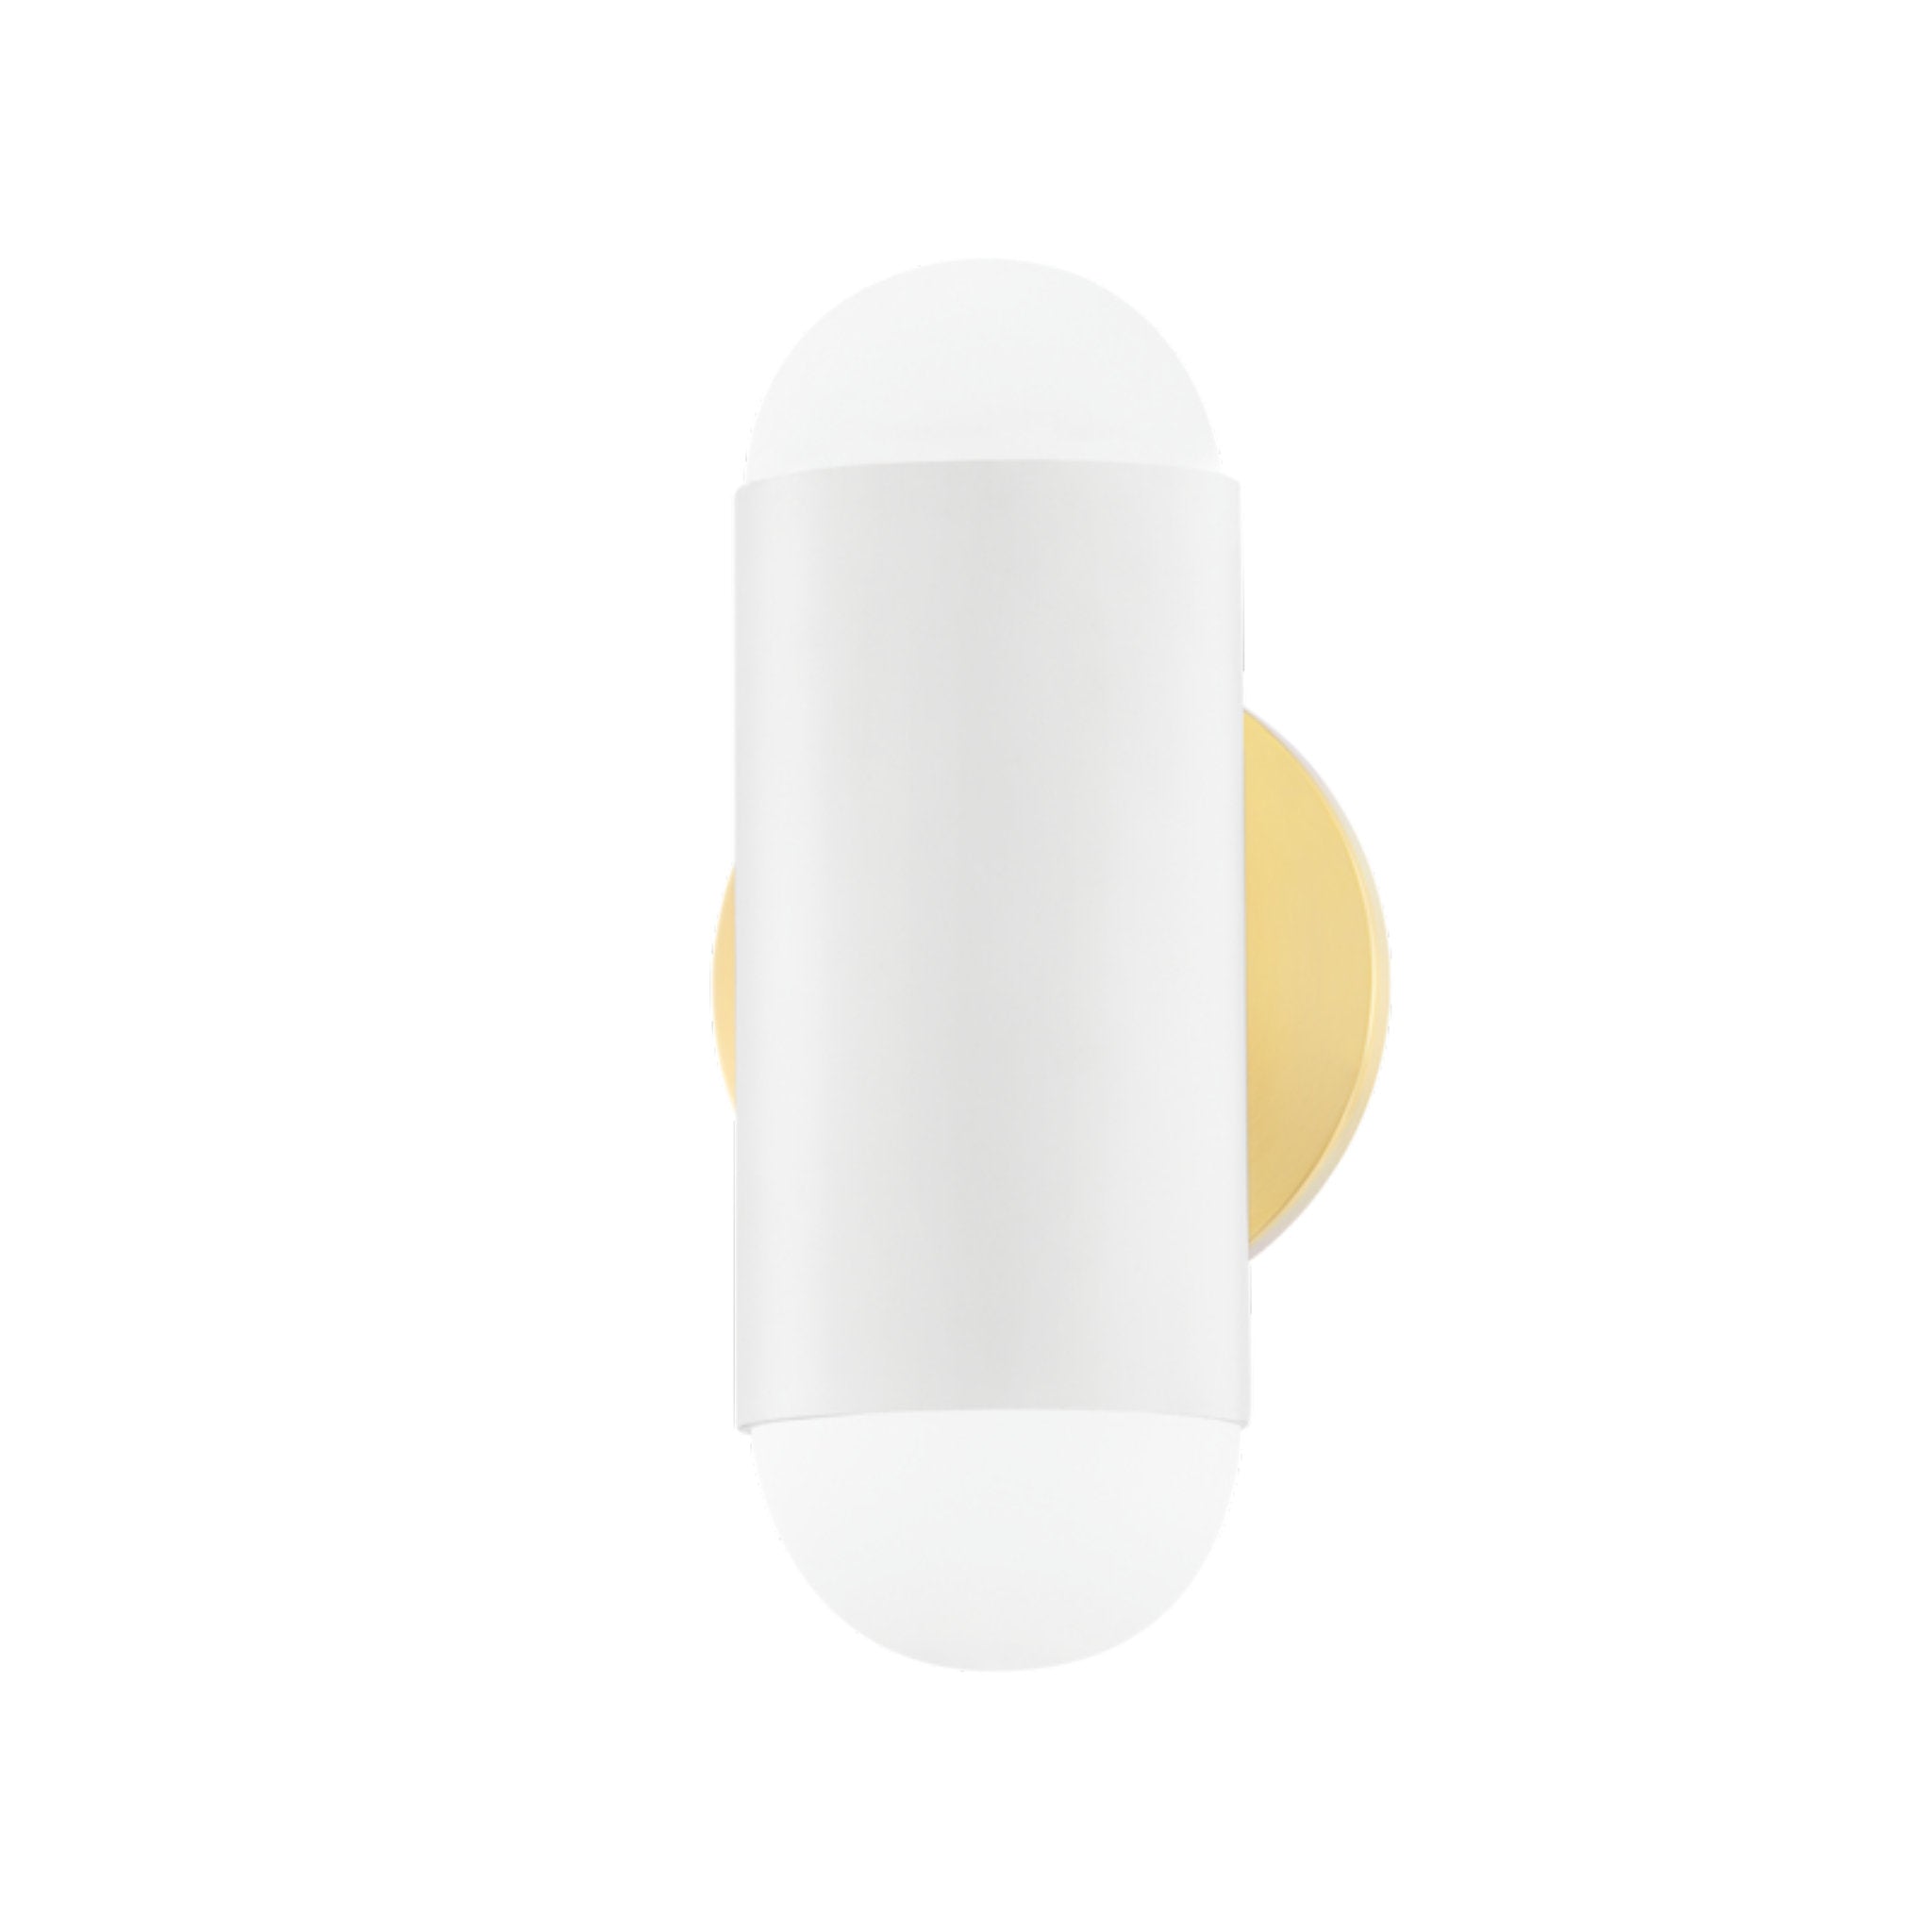 Kira 2-Light Wall Sconce in Aged Brass/Soft White Combo